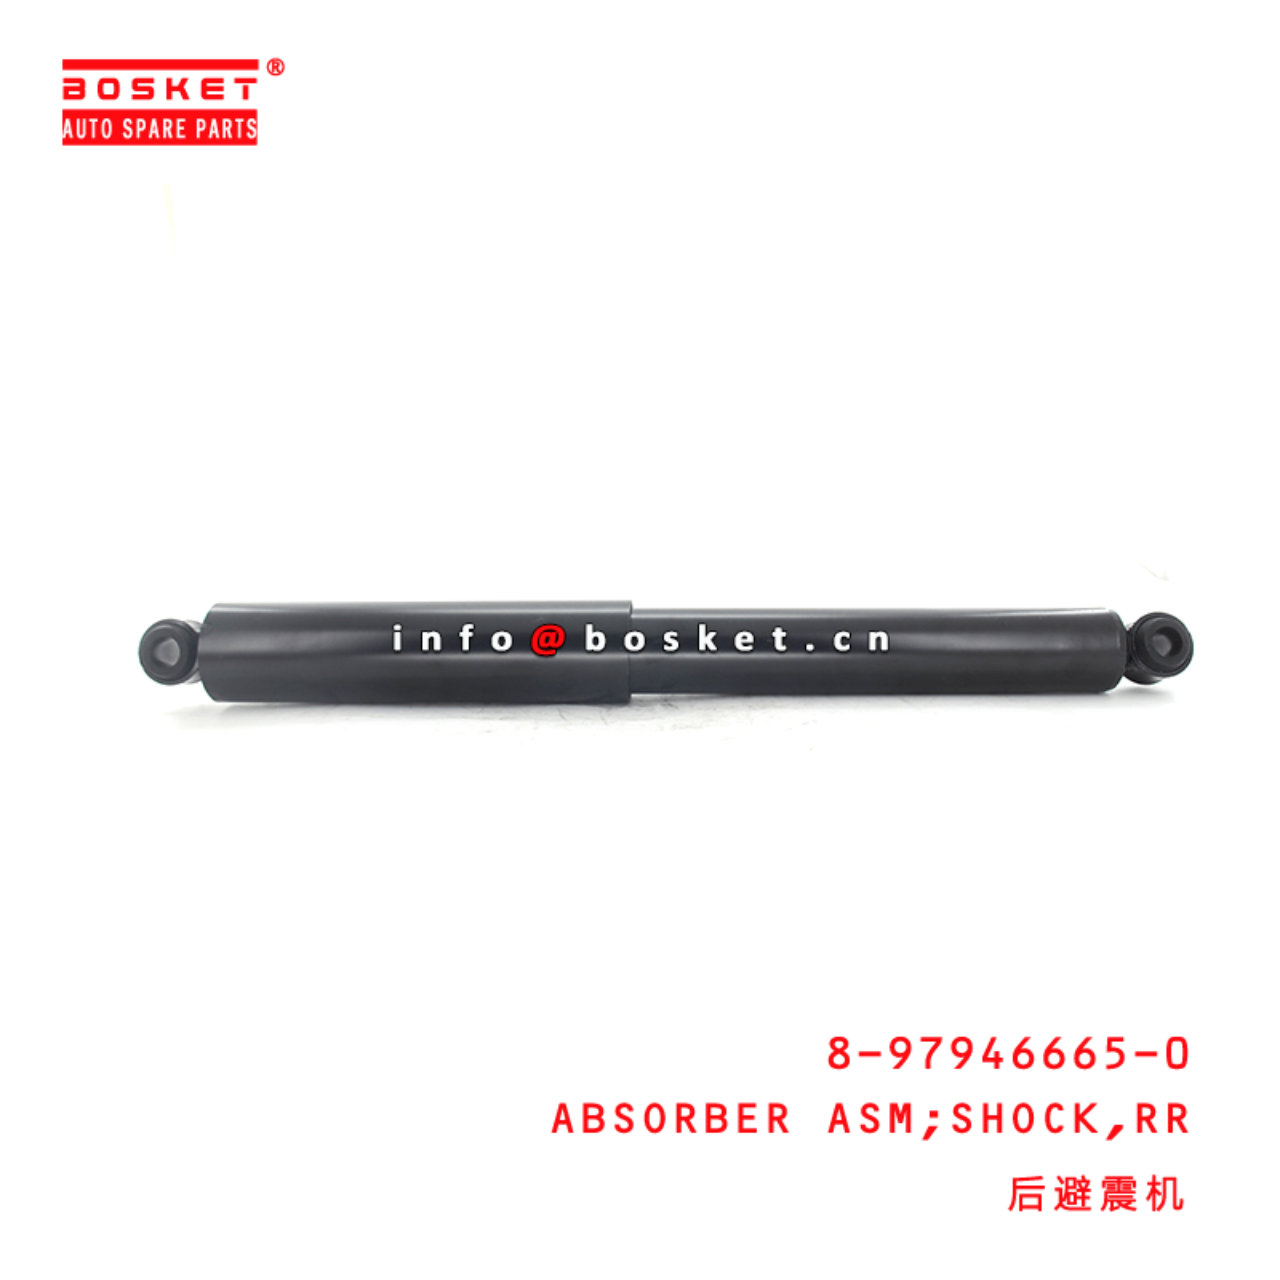 8-97946665-0 Rear Shock Absorber Assembly 8979466650 Suitable for ISUZU DMAX